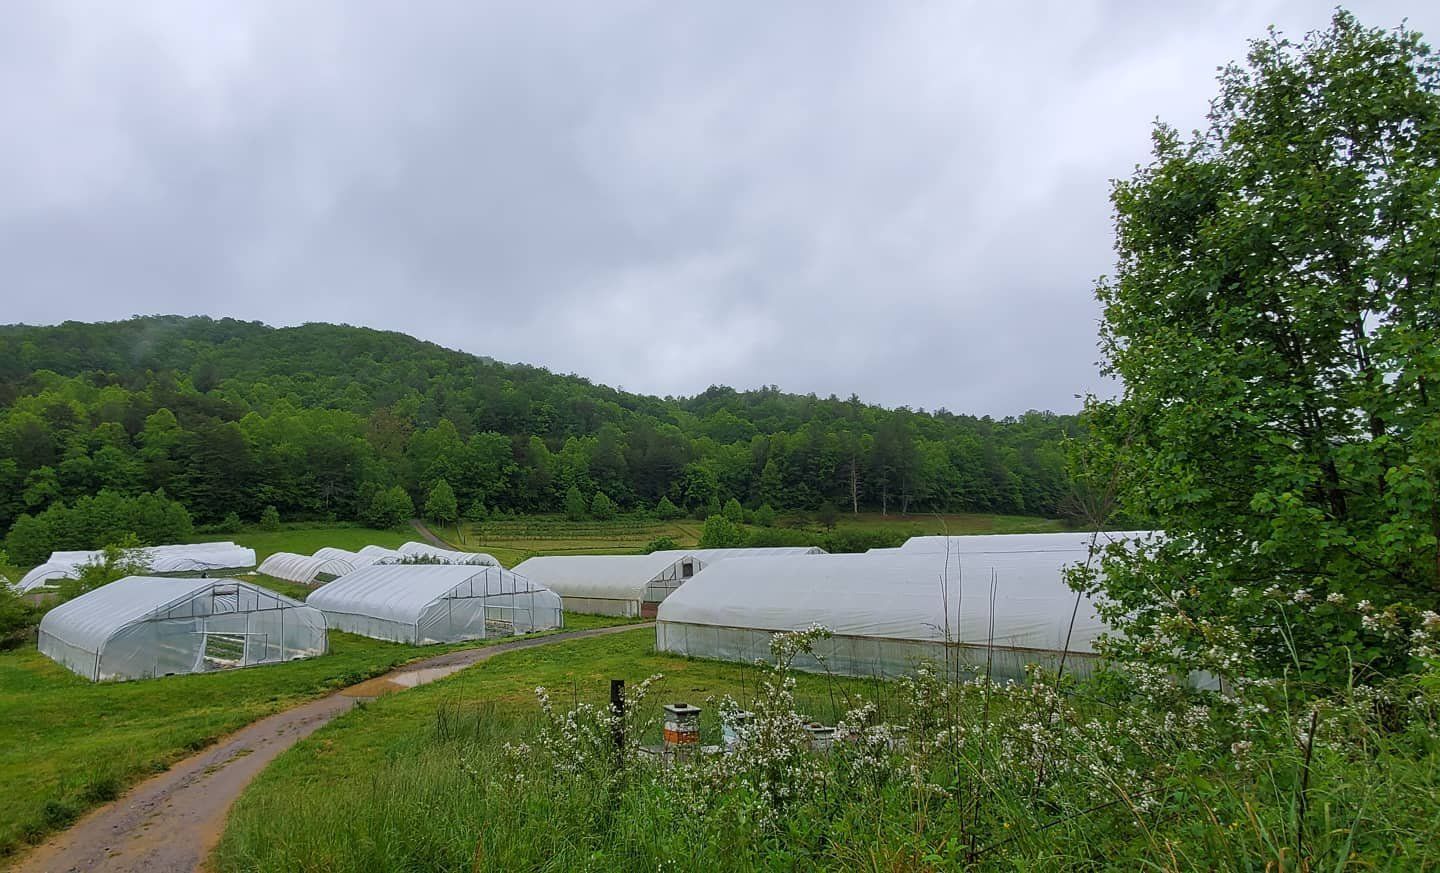 Next Happening: Farm Happenings for May 26, 2020: lackadaisical worry